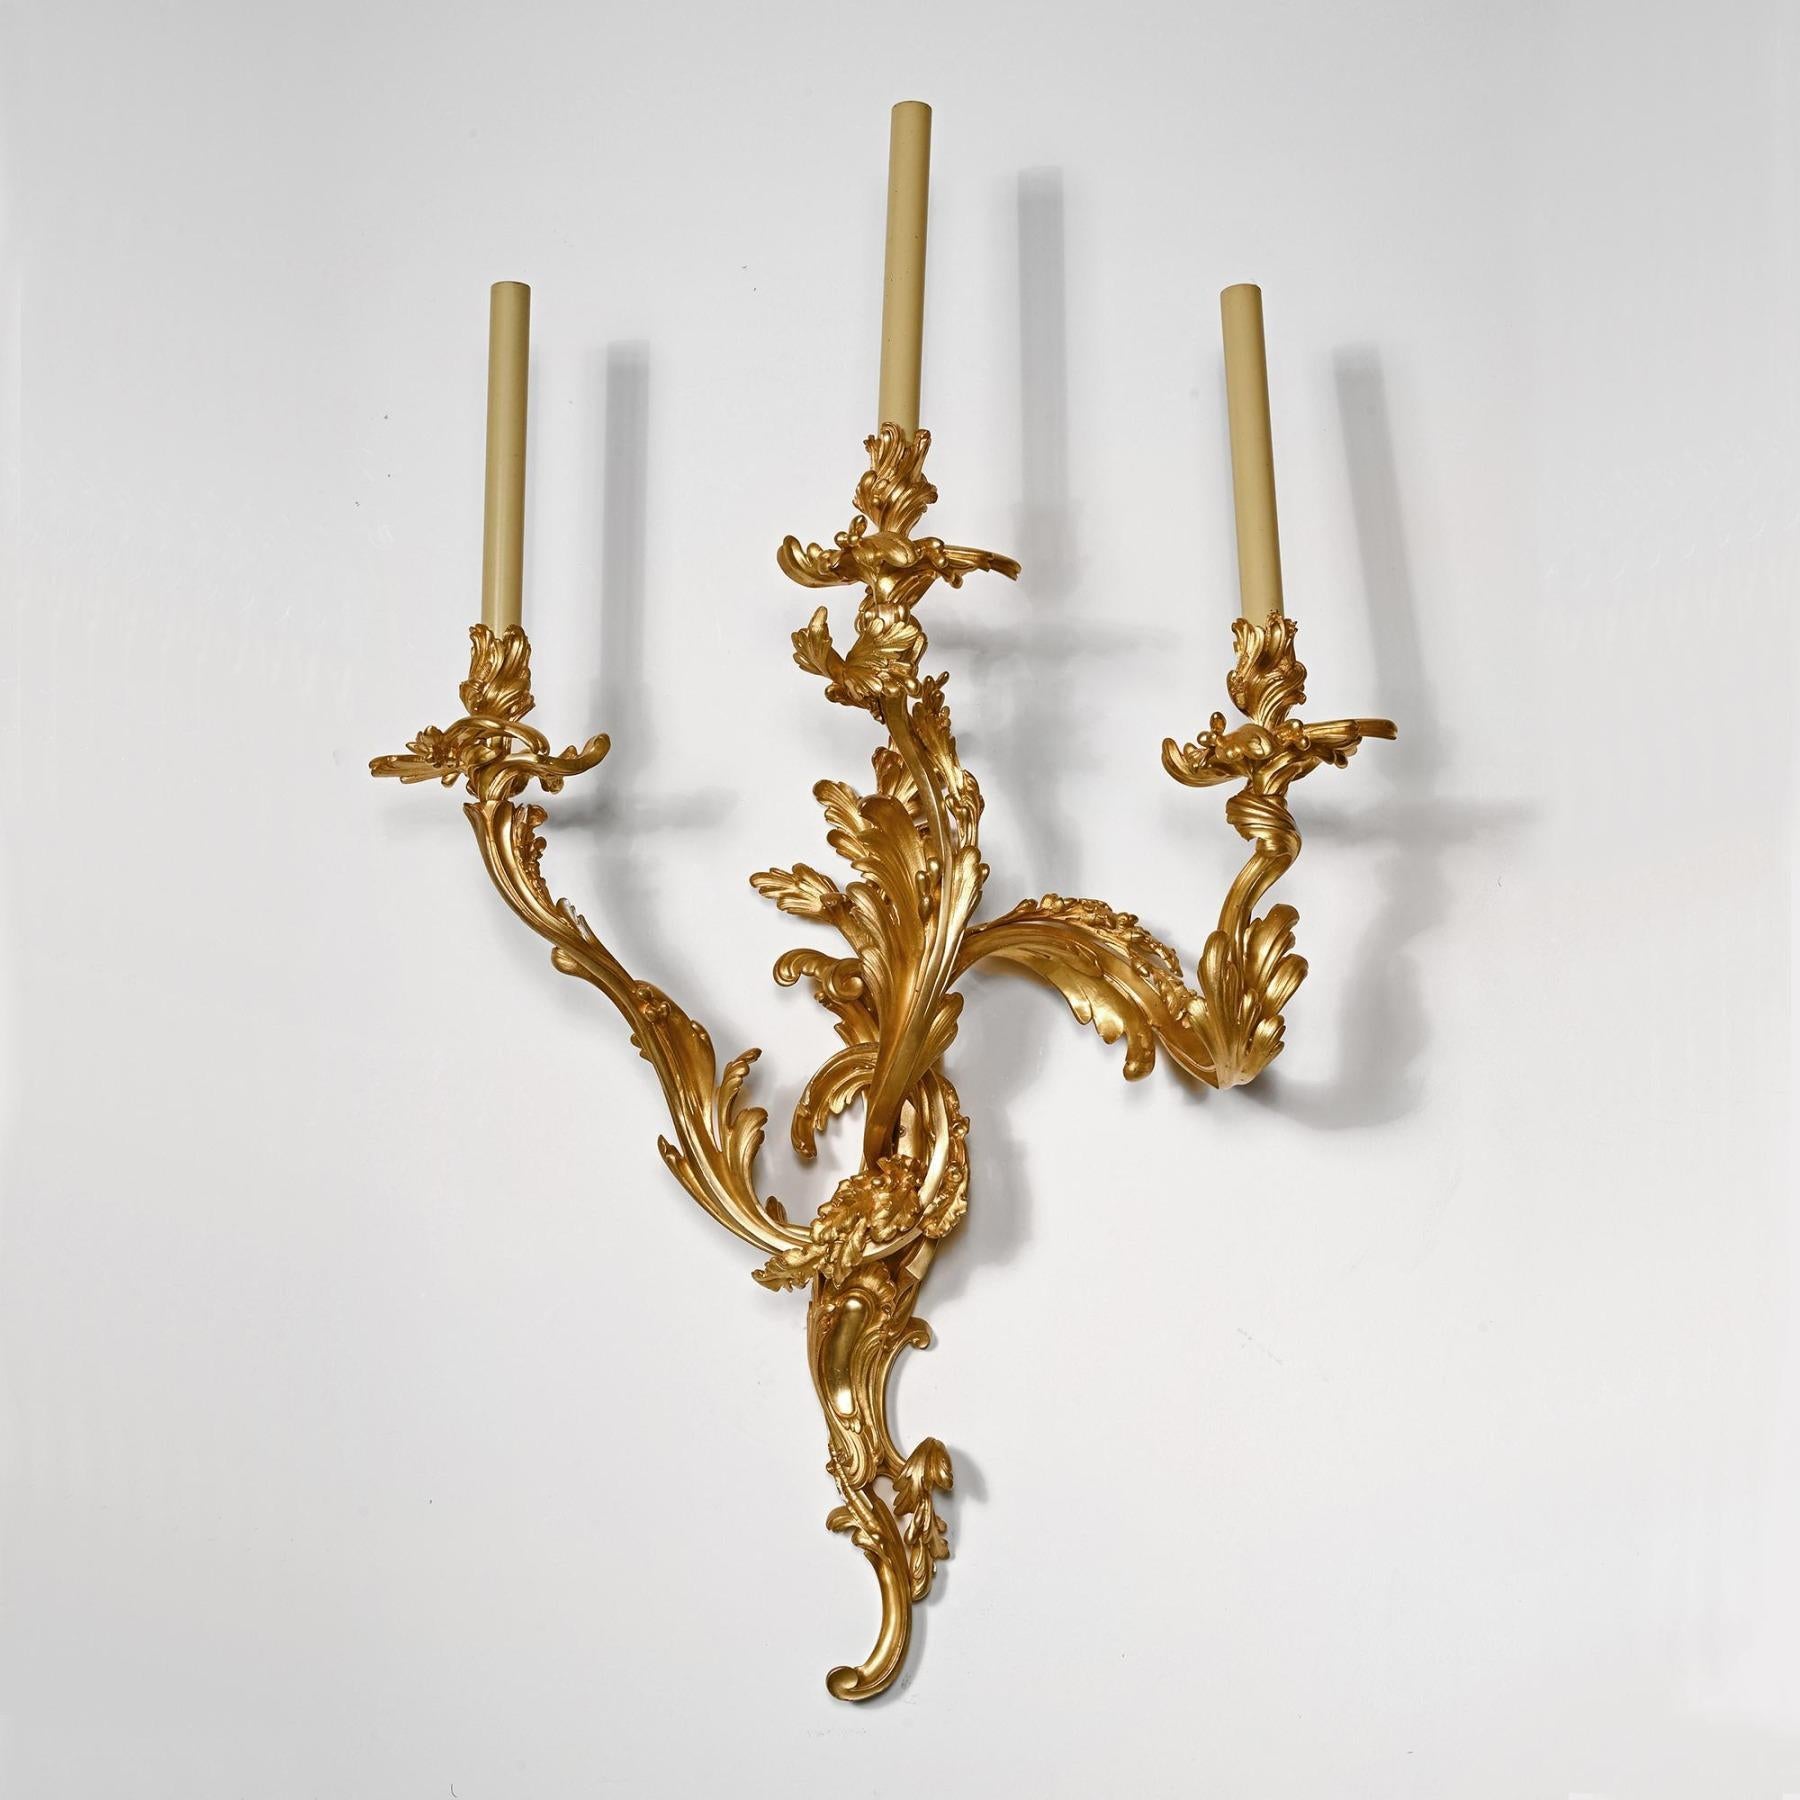 Pair of Large 19th Century French Three Branch Ormolu Wall Lights or Appliqués For Sale 2